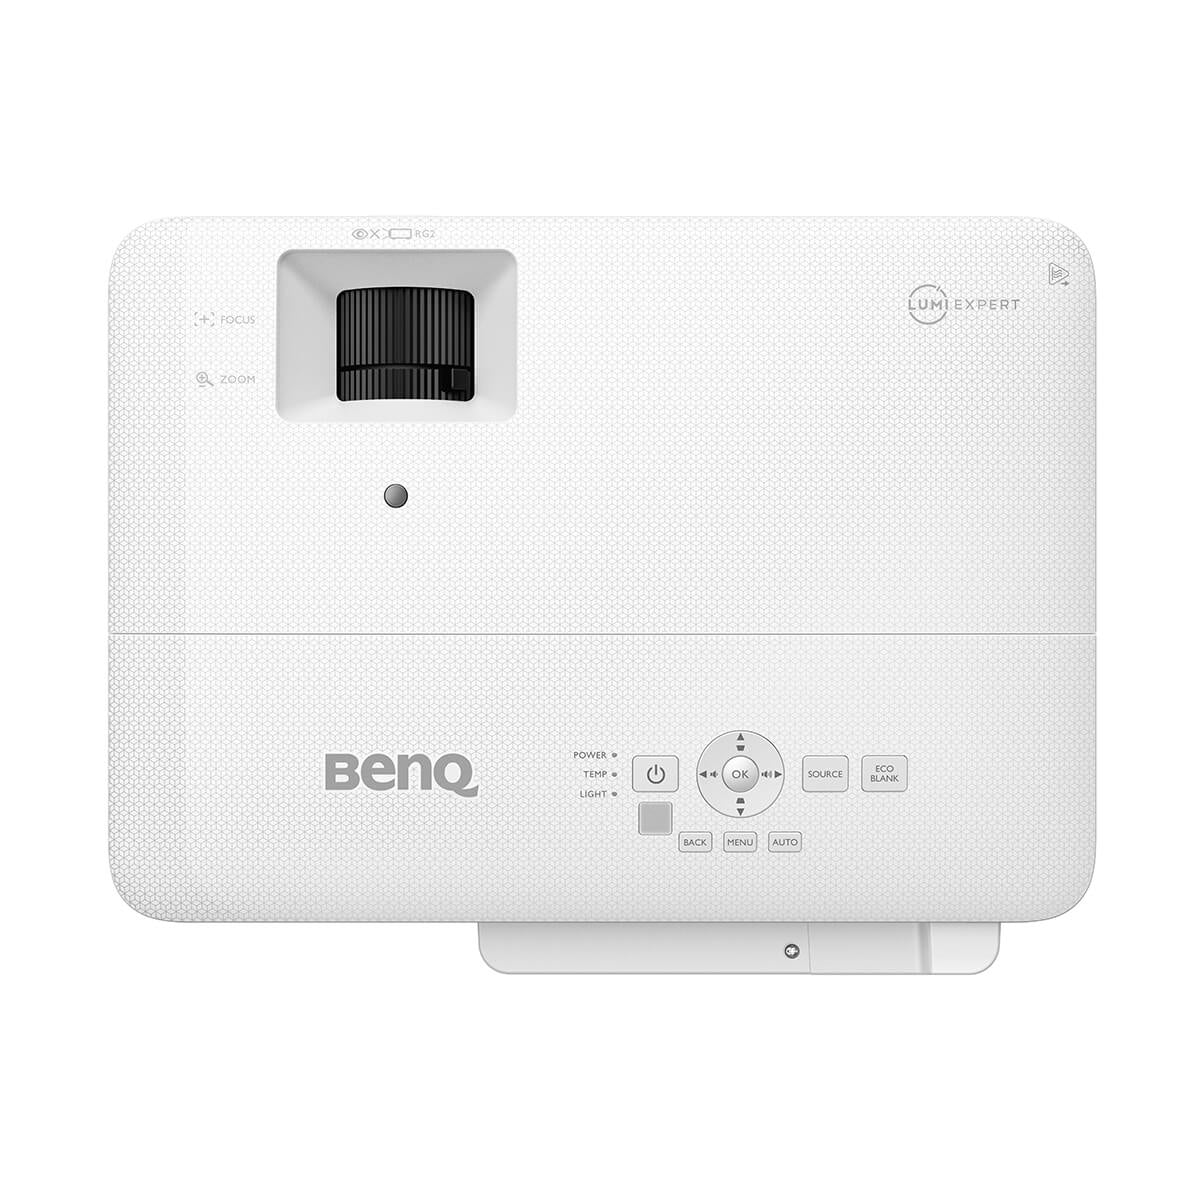 BenQ TH685i HDR Gaming Video Projector